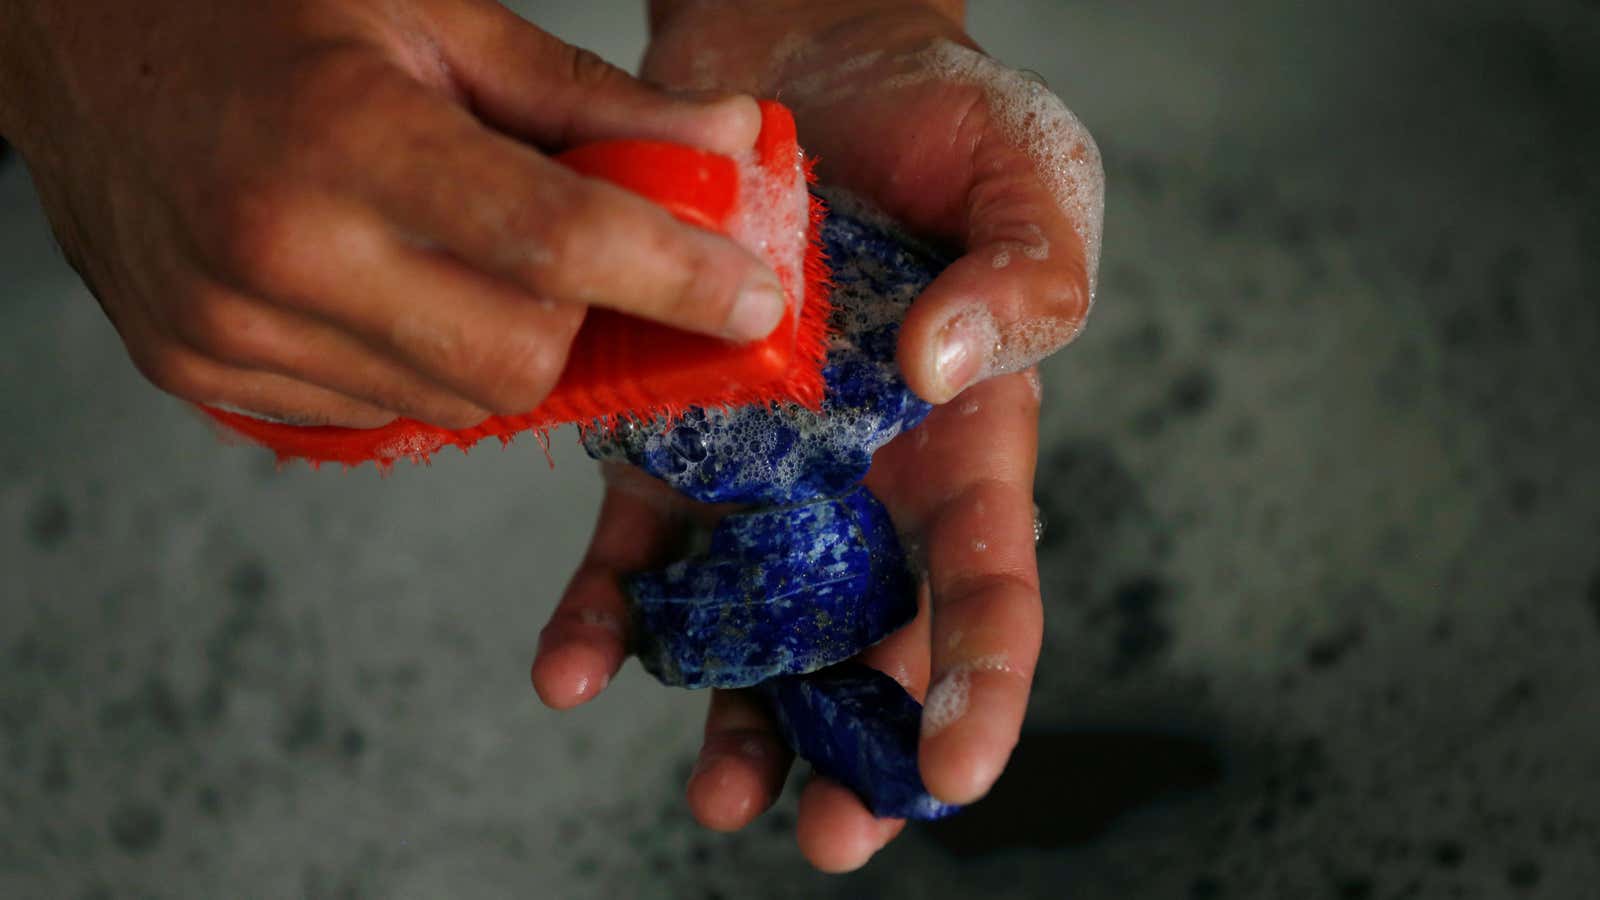 Illegal mining of lapis lazuli, a gem, is a major source of revenue for the Taliban.